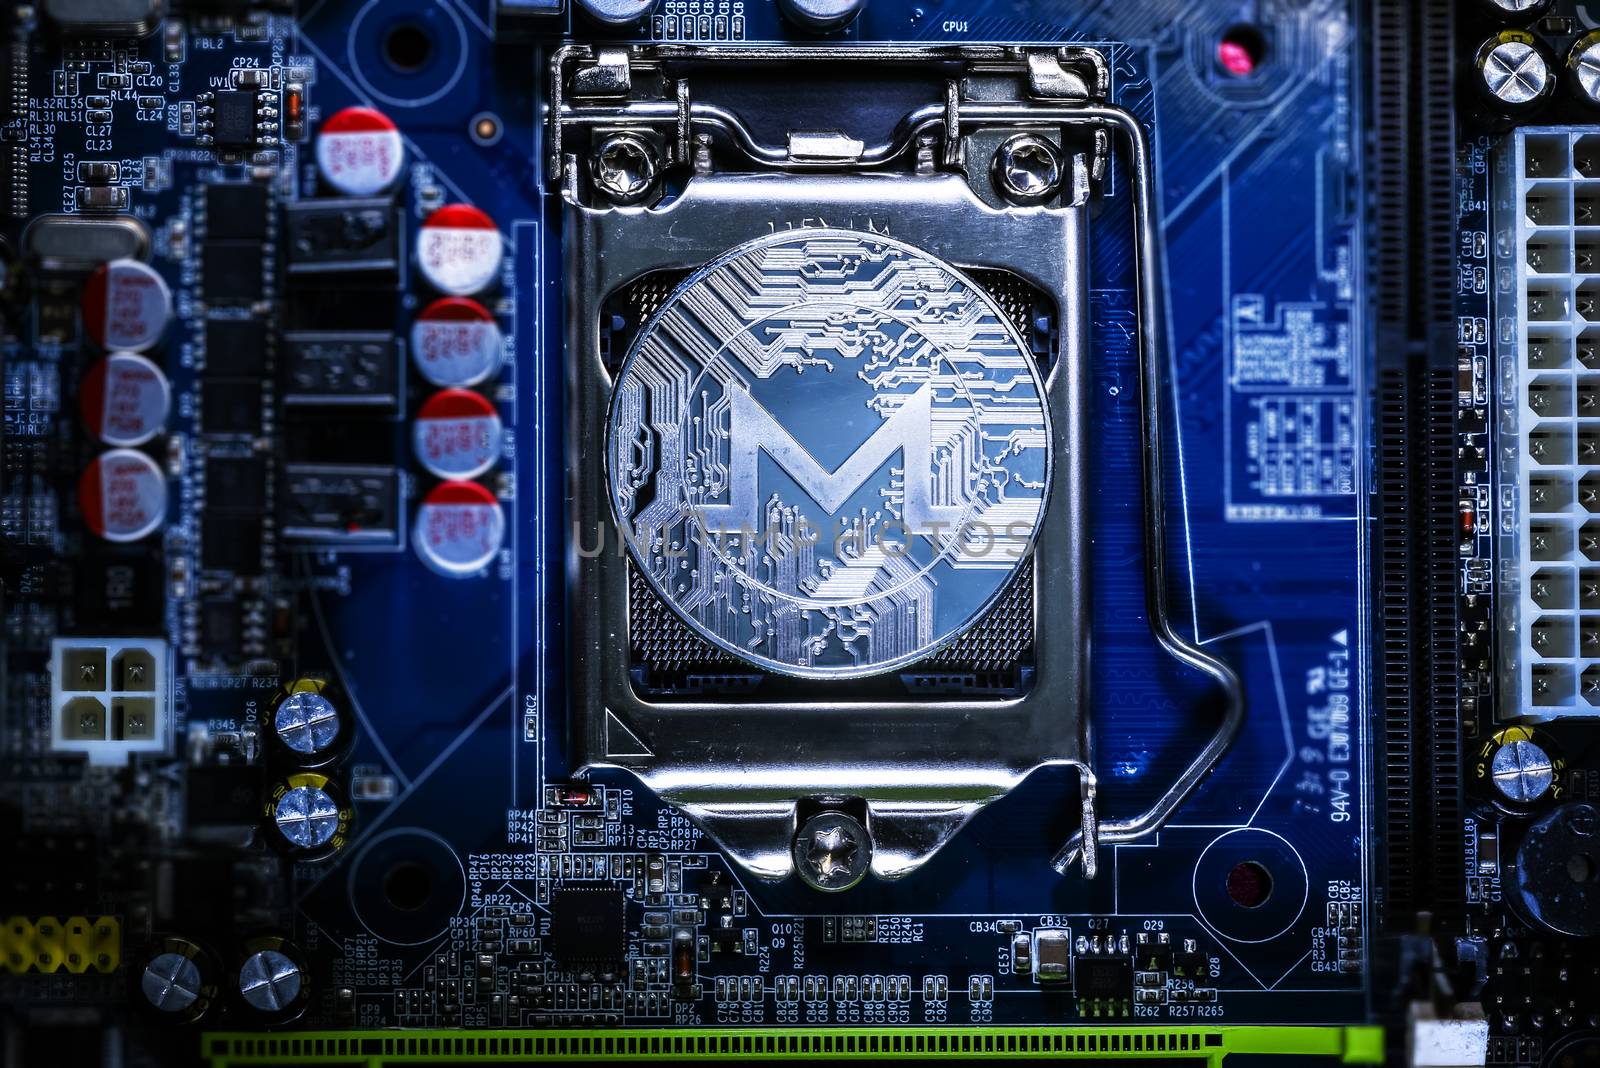 Top view of Monero cryptocurrency physical coin on computer mother board processor.Bitcoin mining farm, working computer equipment concept.